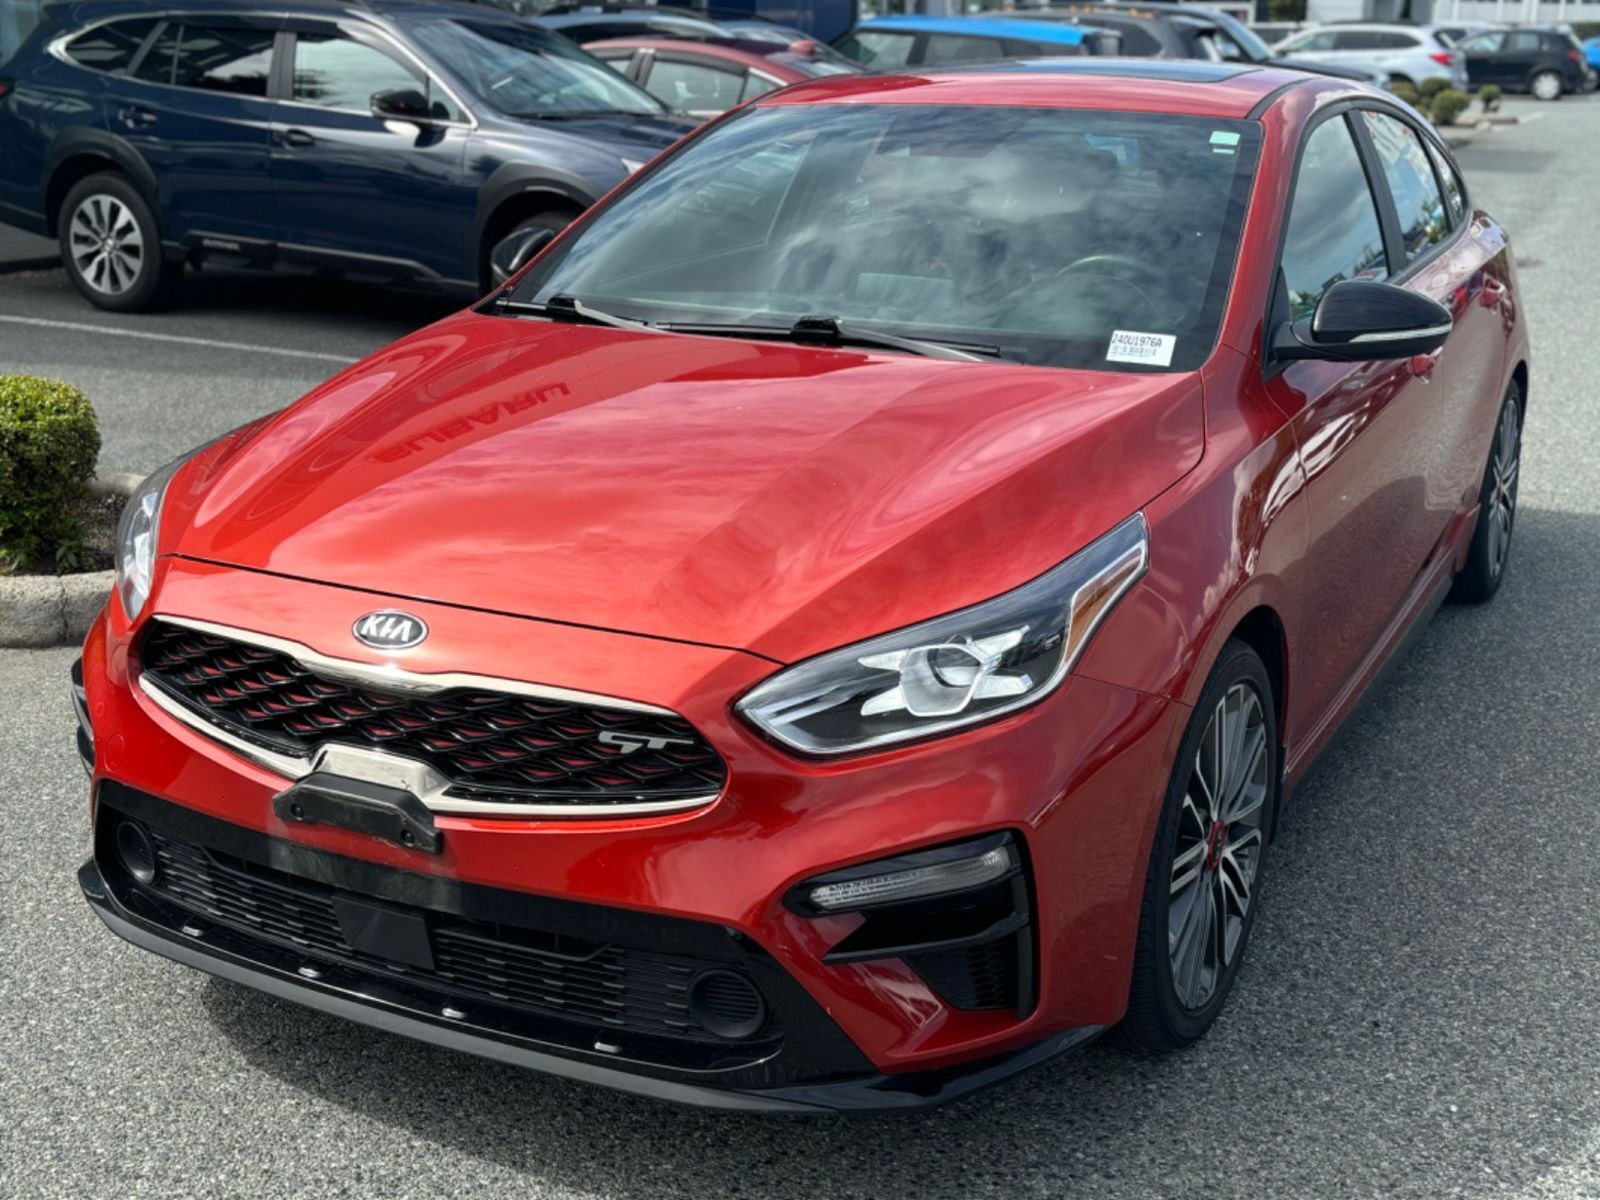 2021 Kia Forte5 CLEAN CARFAX | LOW KMS | LEATHER SEATS | GT | NAVI